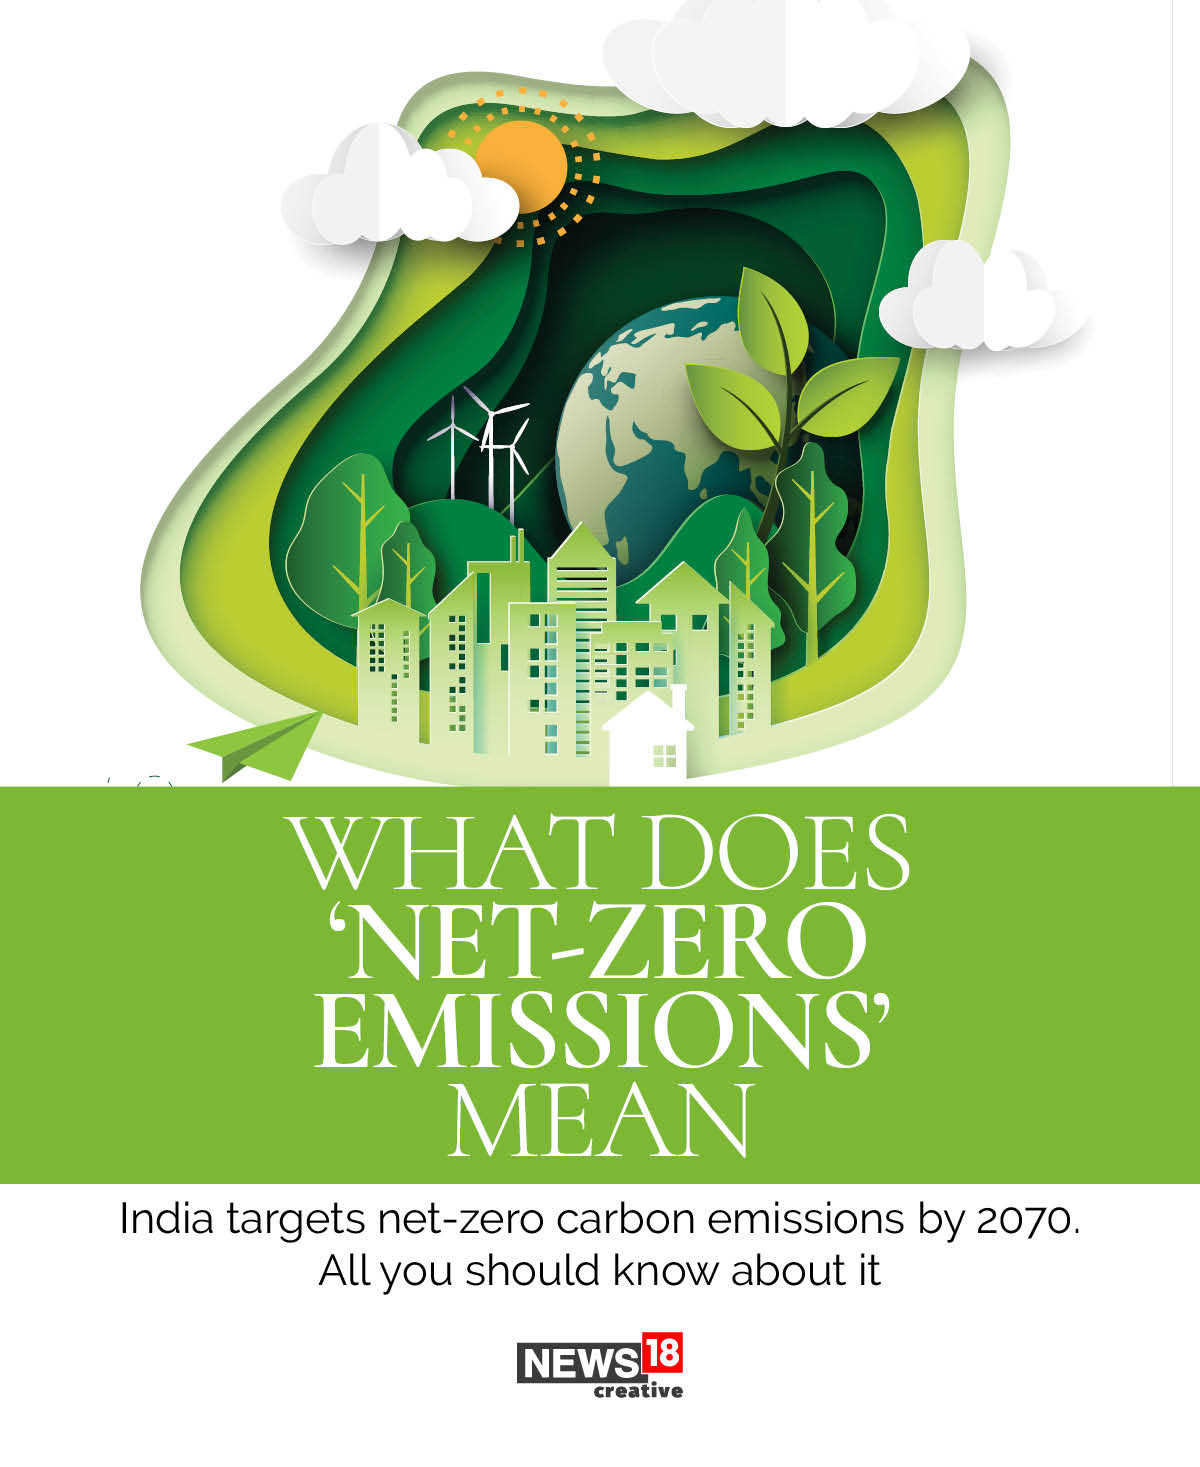 India sets net-zero target at 2070: A look at other climate targets announced by PM Modi